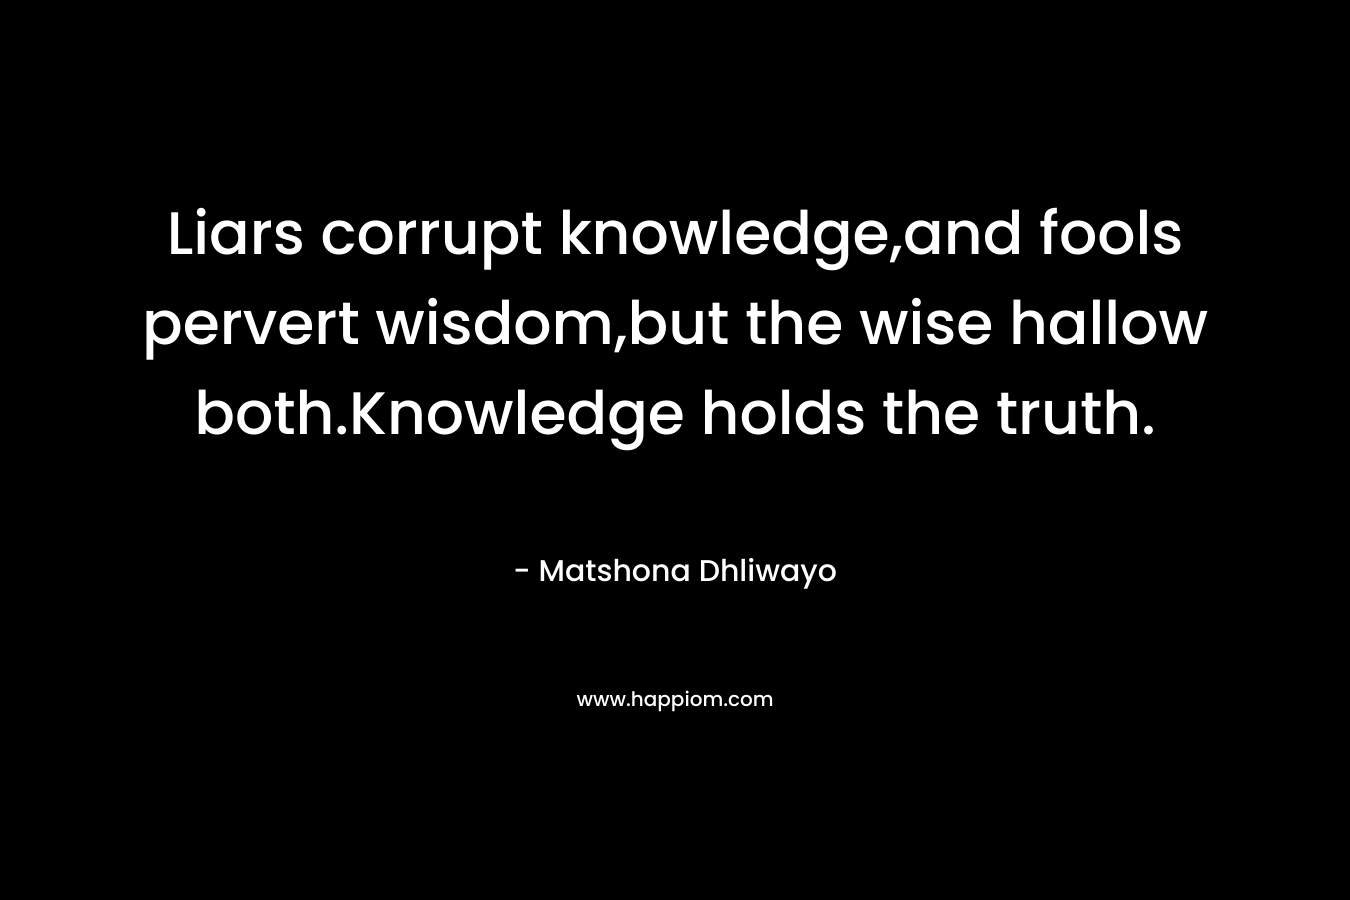 Liars corrupt knowledge,and fools pervert wisdom,but the wise hallow both.Knowledge holds the truth. – Matshona Dhliwayo